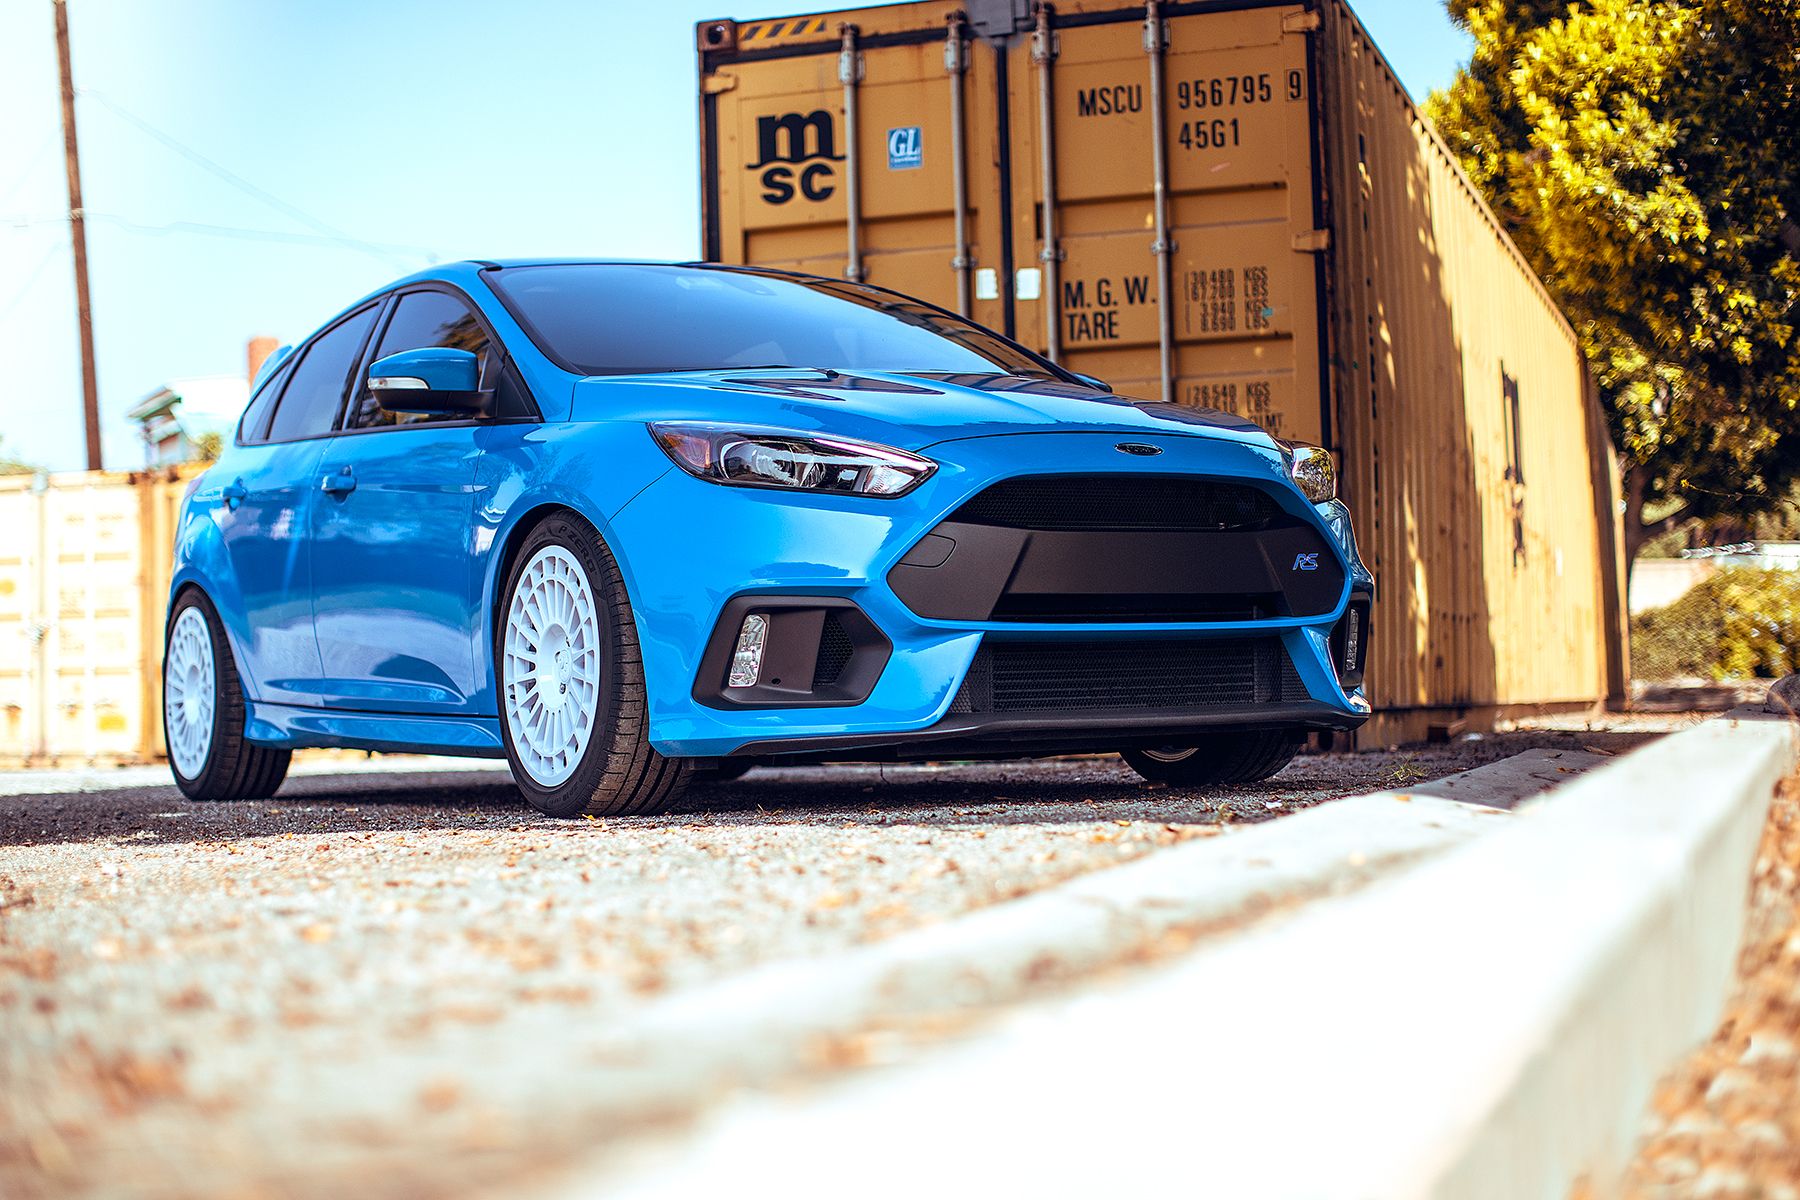 Is the Focus Rs Reliable 